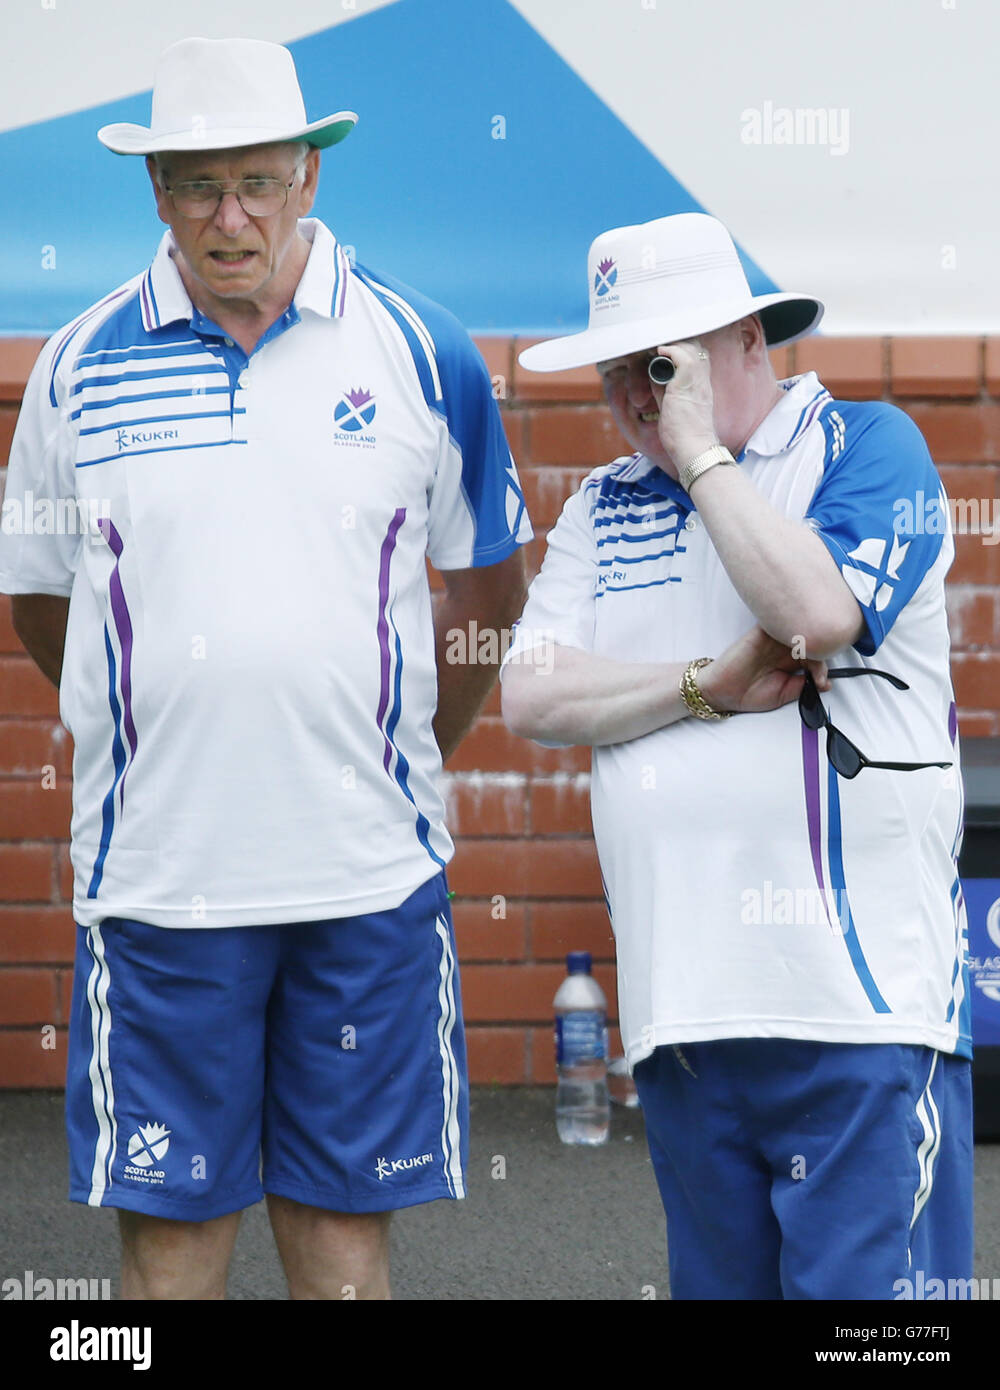 England's Robert Conway (right) an Ron McArthur (left) during the Para-Sports Mixed Pairs at Kelvingrove Lawn Bowls Centre during the 2014 Commonwealth Games in Glasgow, Scotland. Stock Photo